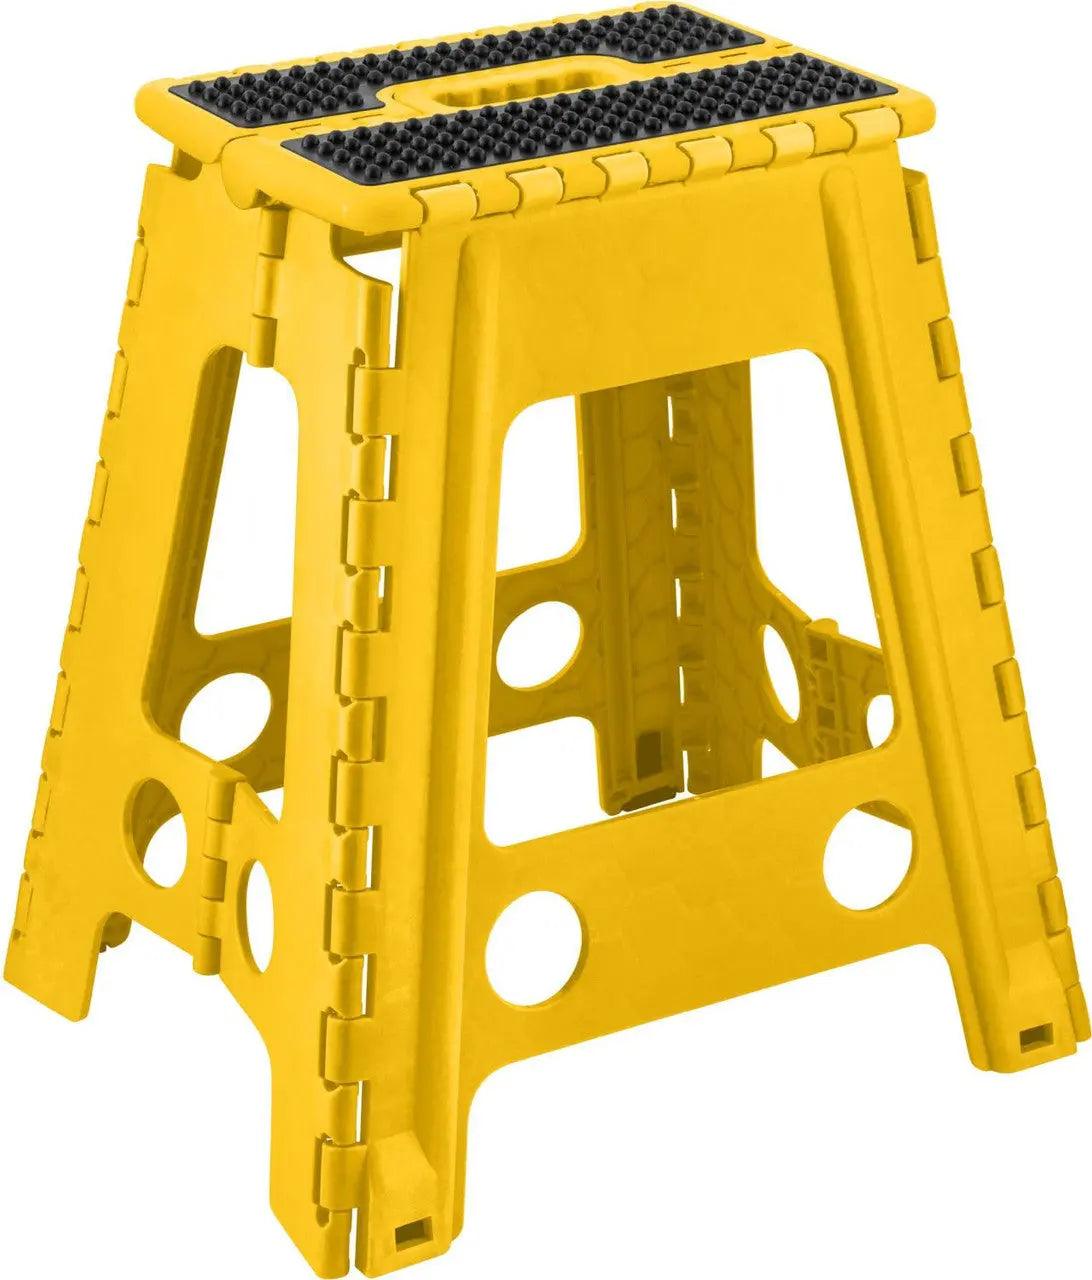 Oh So Handy Foldable Step Stool - 17" - Greens Essentials